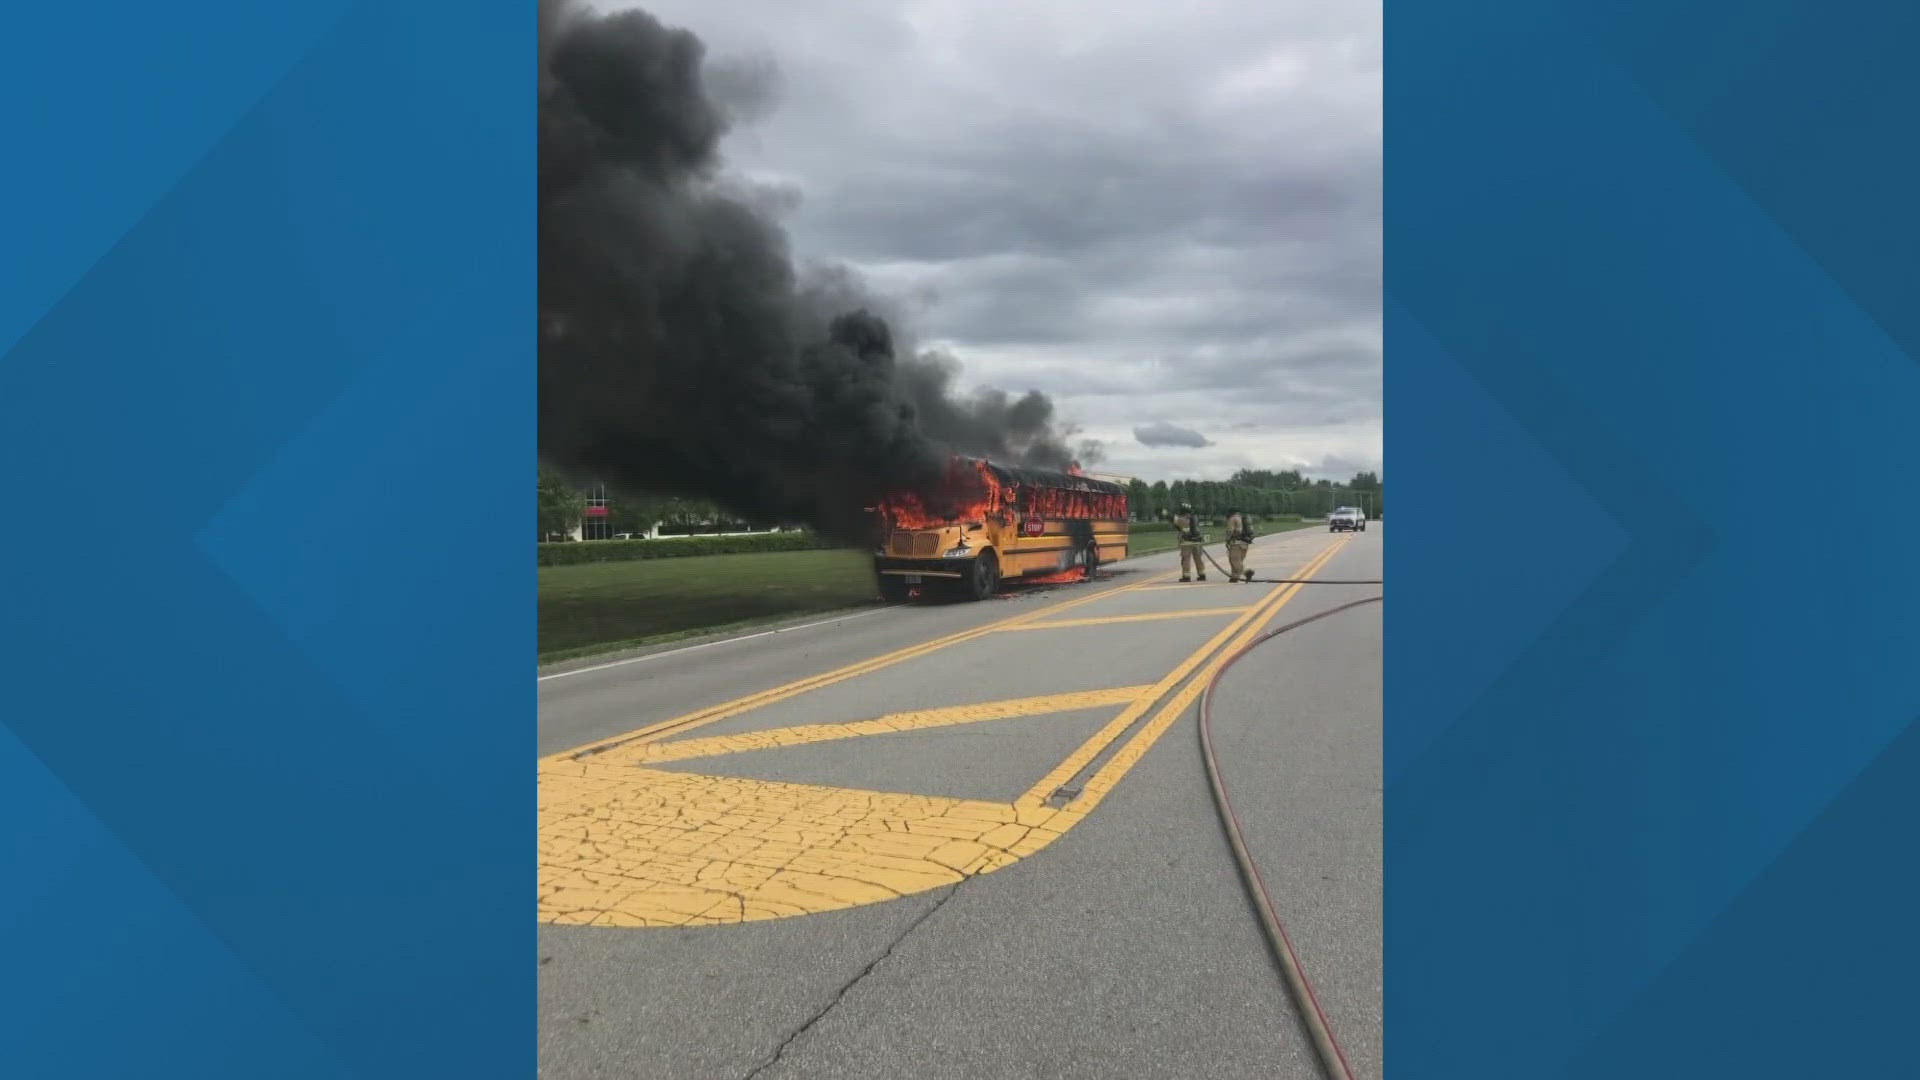 The school superintendent said she expresses gratitude to the bus driver for her quick thinking and bravery during Thursday's fire.